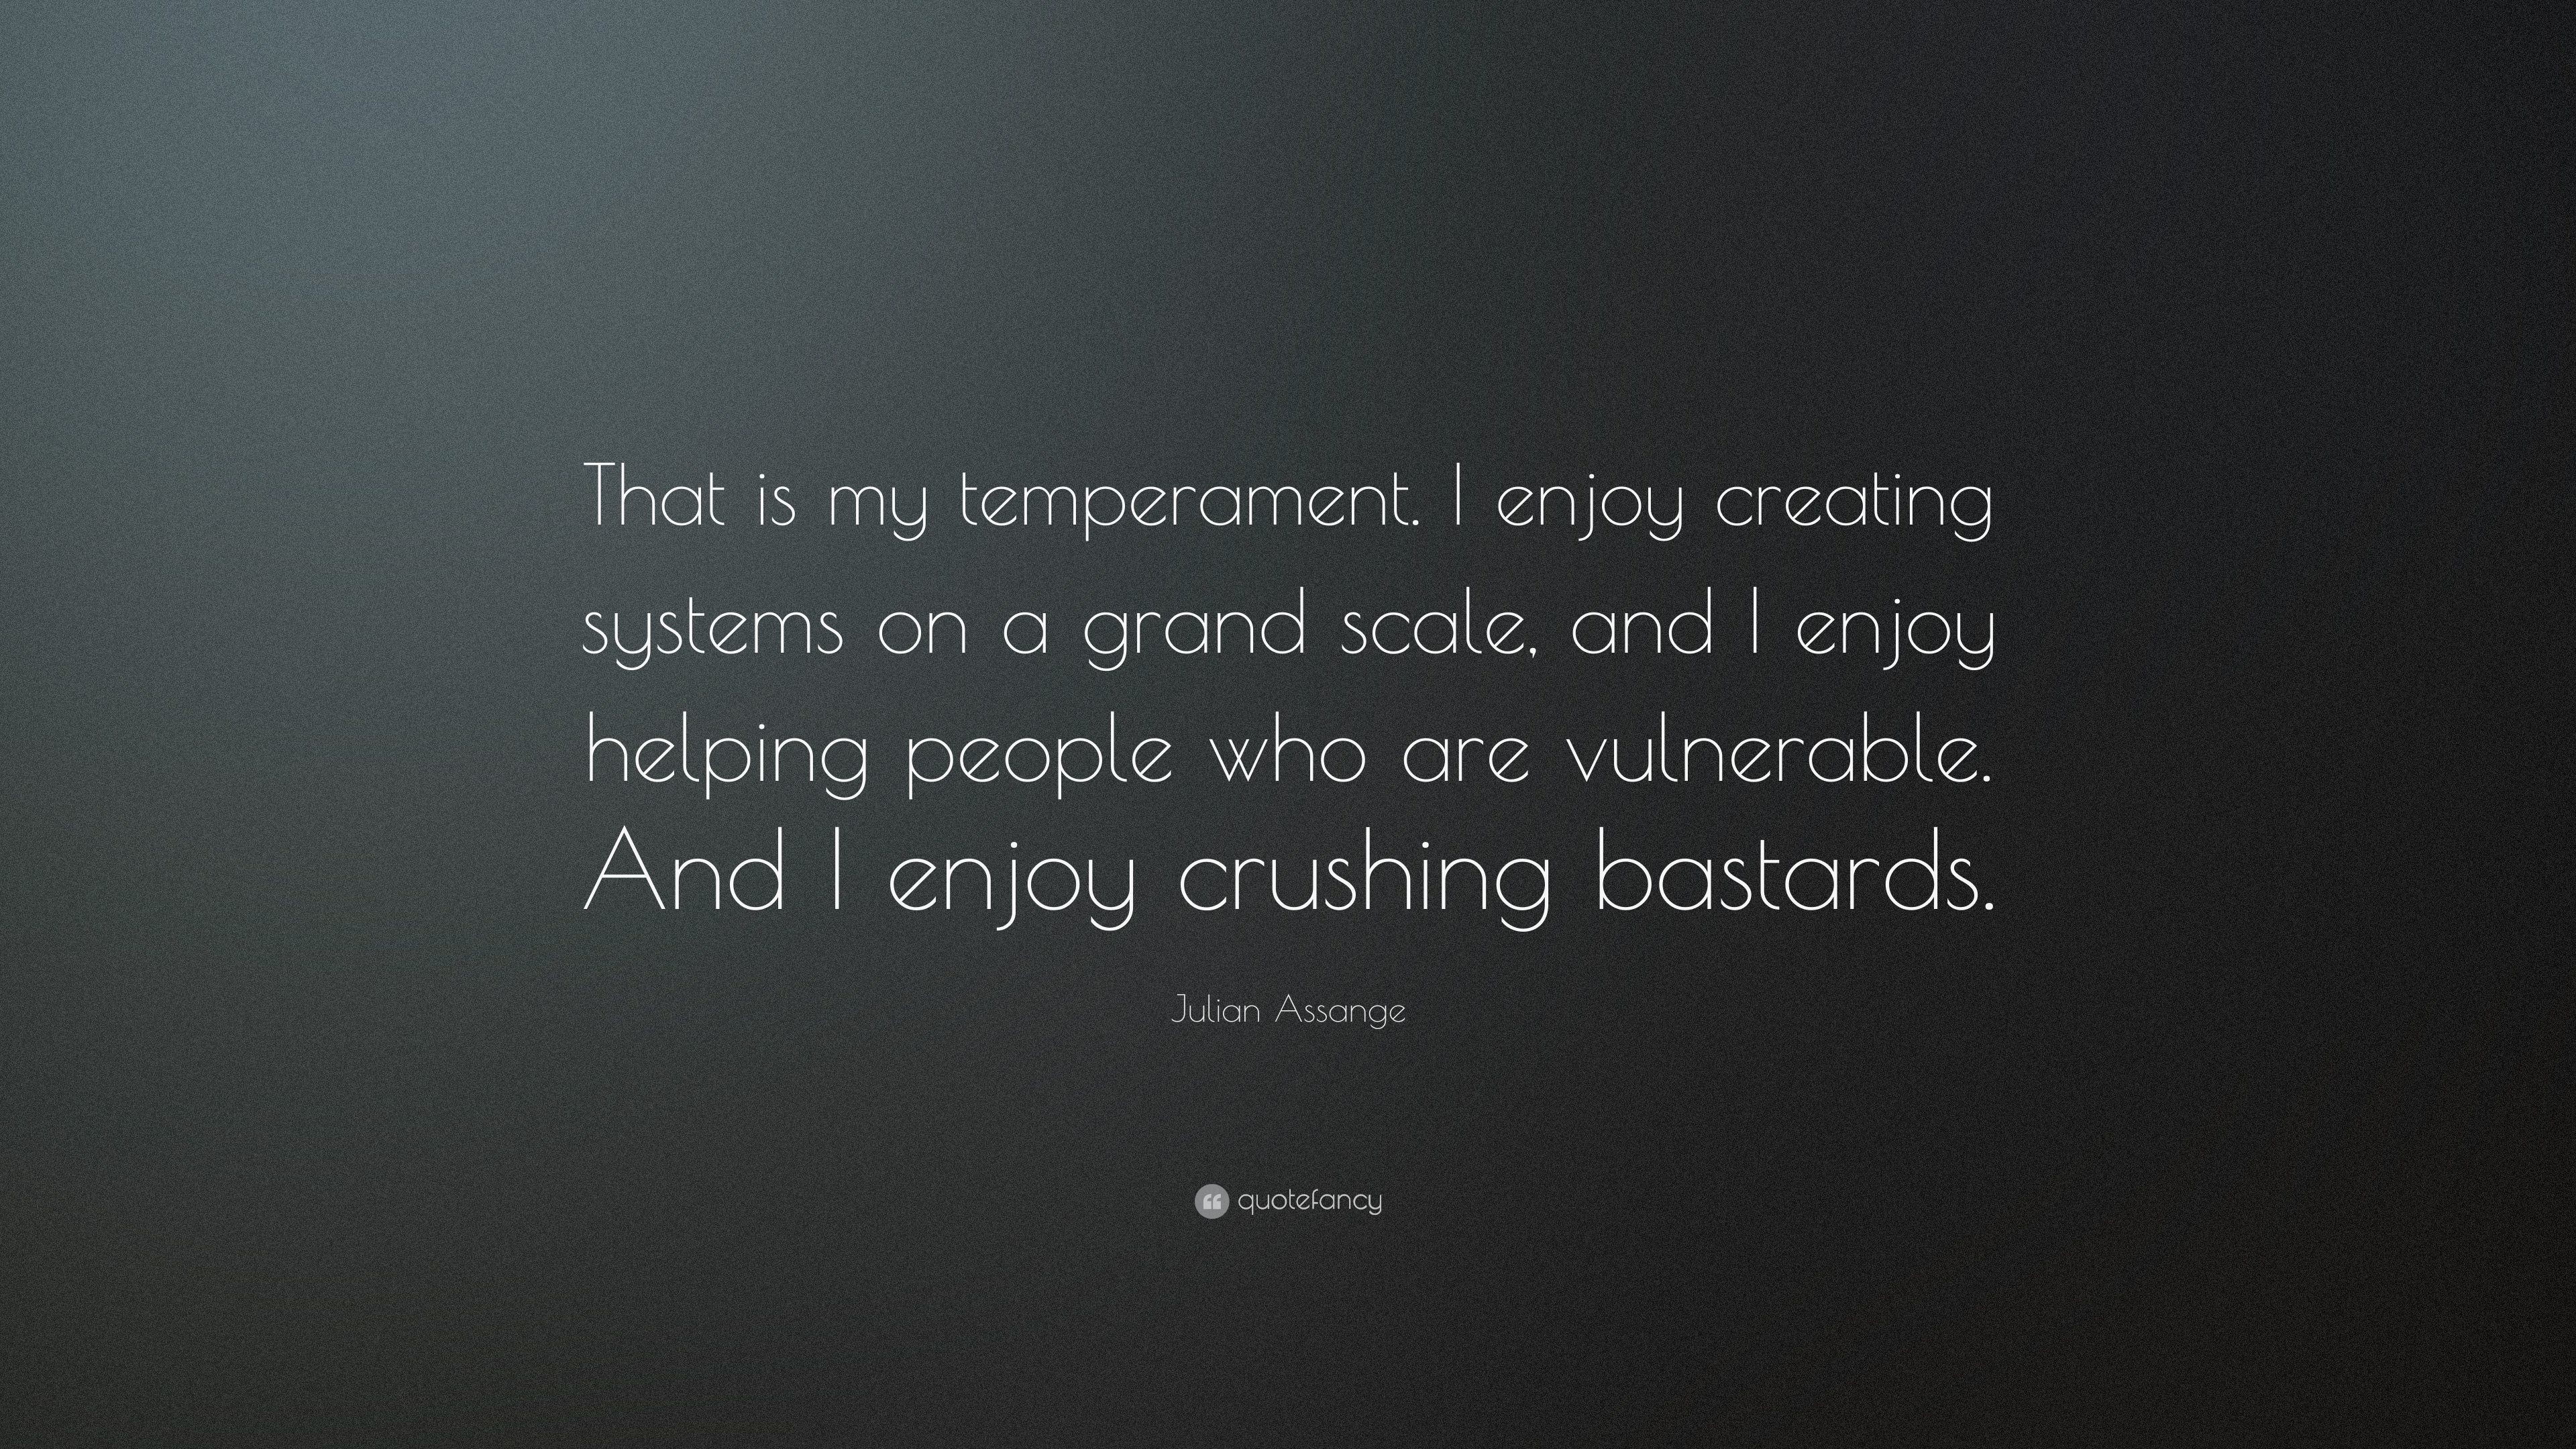 3840x2160 Julian Assange Quote: “That is my temperament. I enjoy creating systems on a